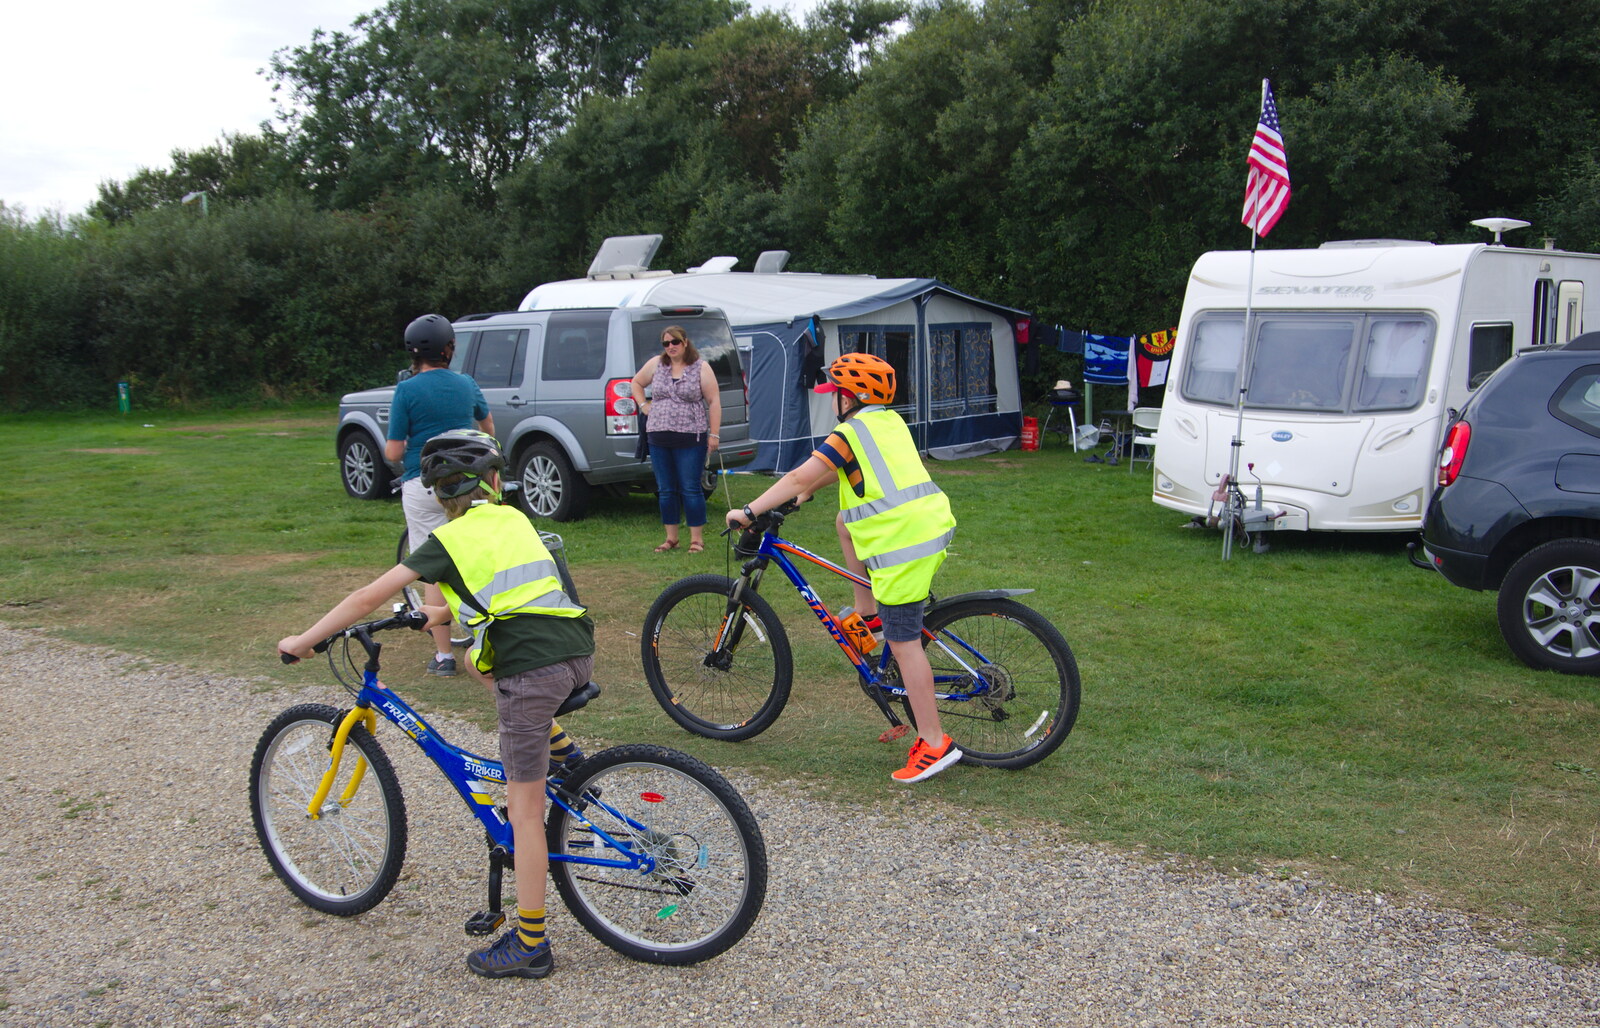 We prepare to cycle over to the Nelson Head from Waxham Sands and the Nelson Head Beer Festival, Horsey, Norfolk - 31st August 2019